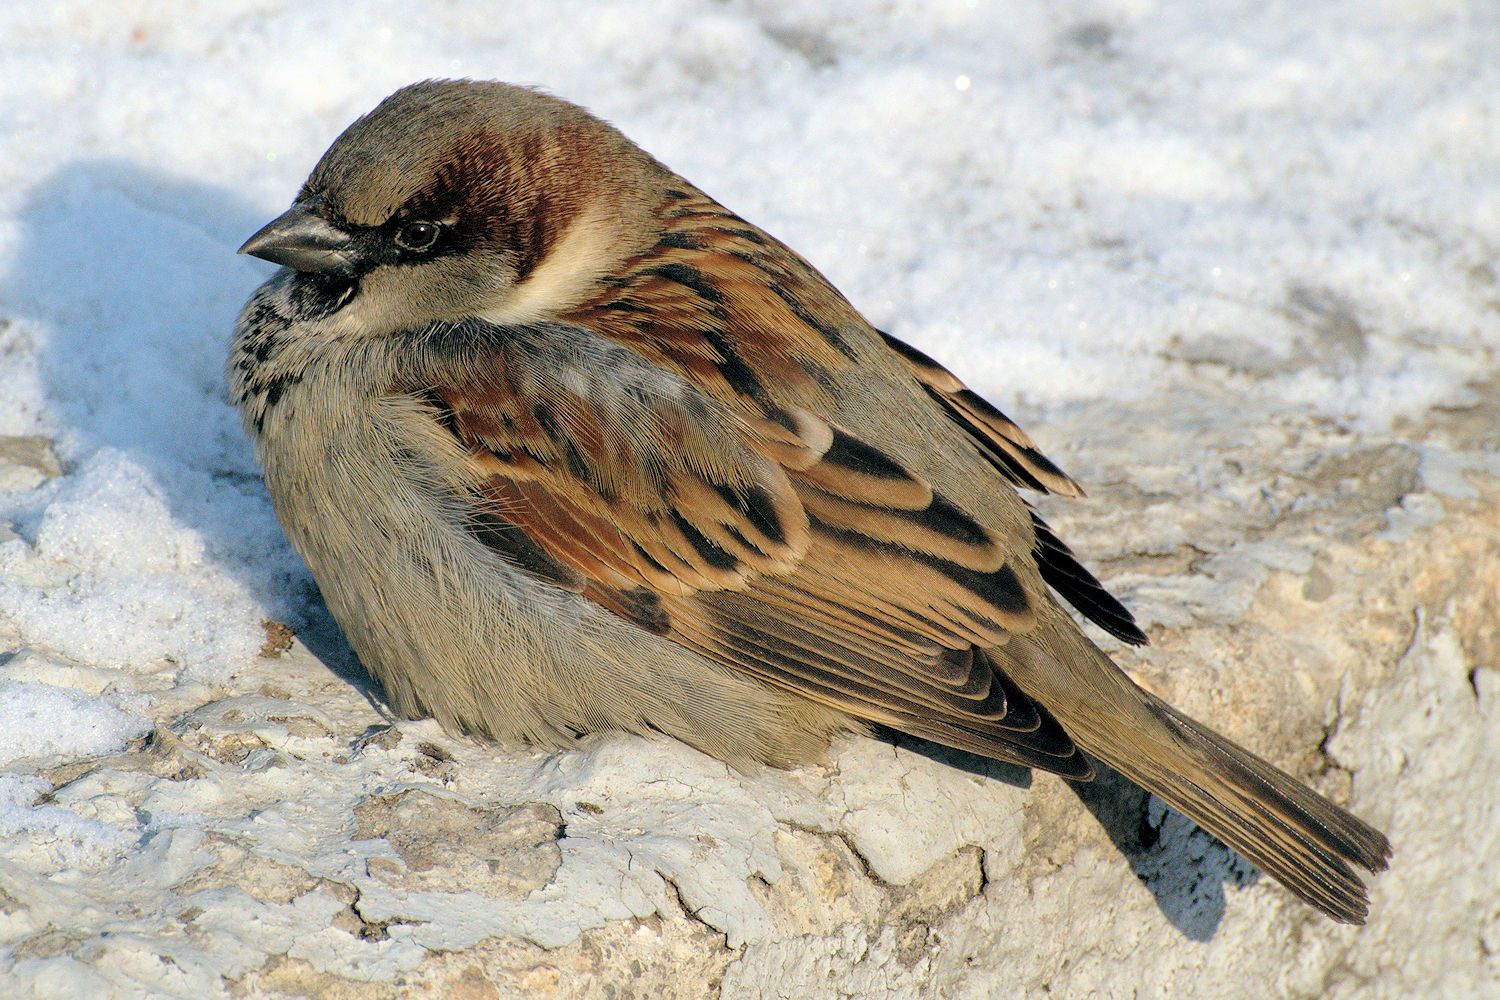 What adaptations do birds have to survive in the wild?